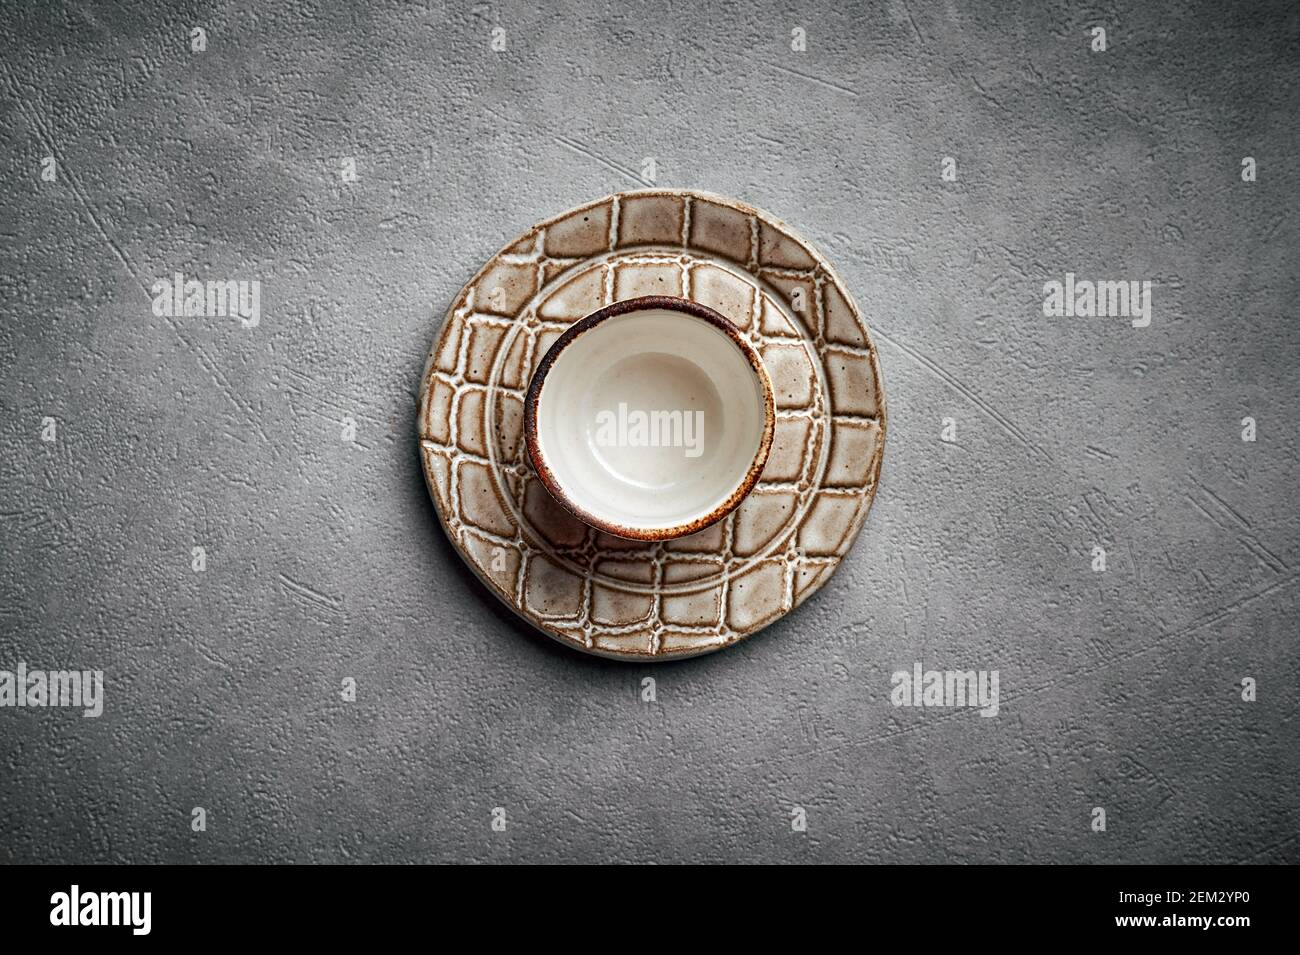 Blank ceramic saucer and plate like a crocodile skin texture on a dark background, copy space, top view Stock Photo